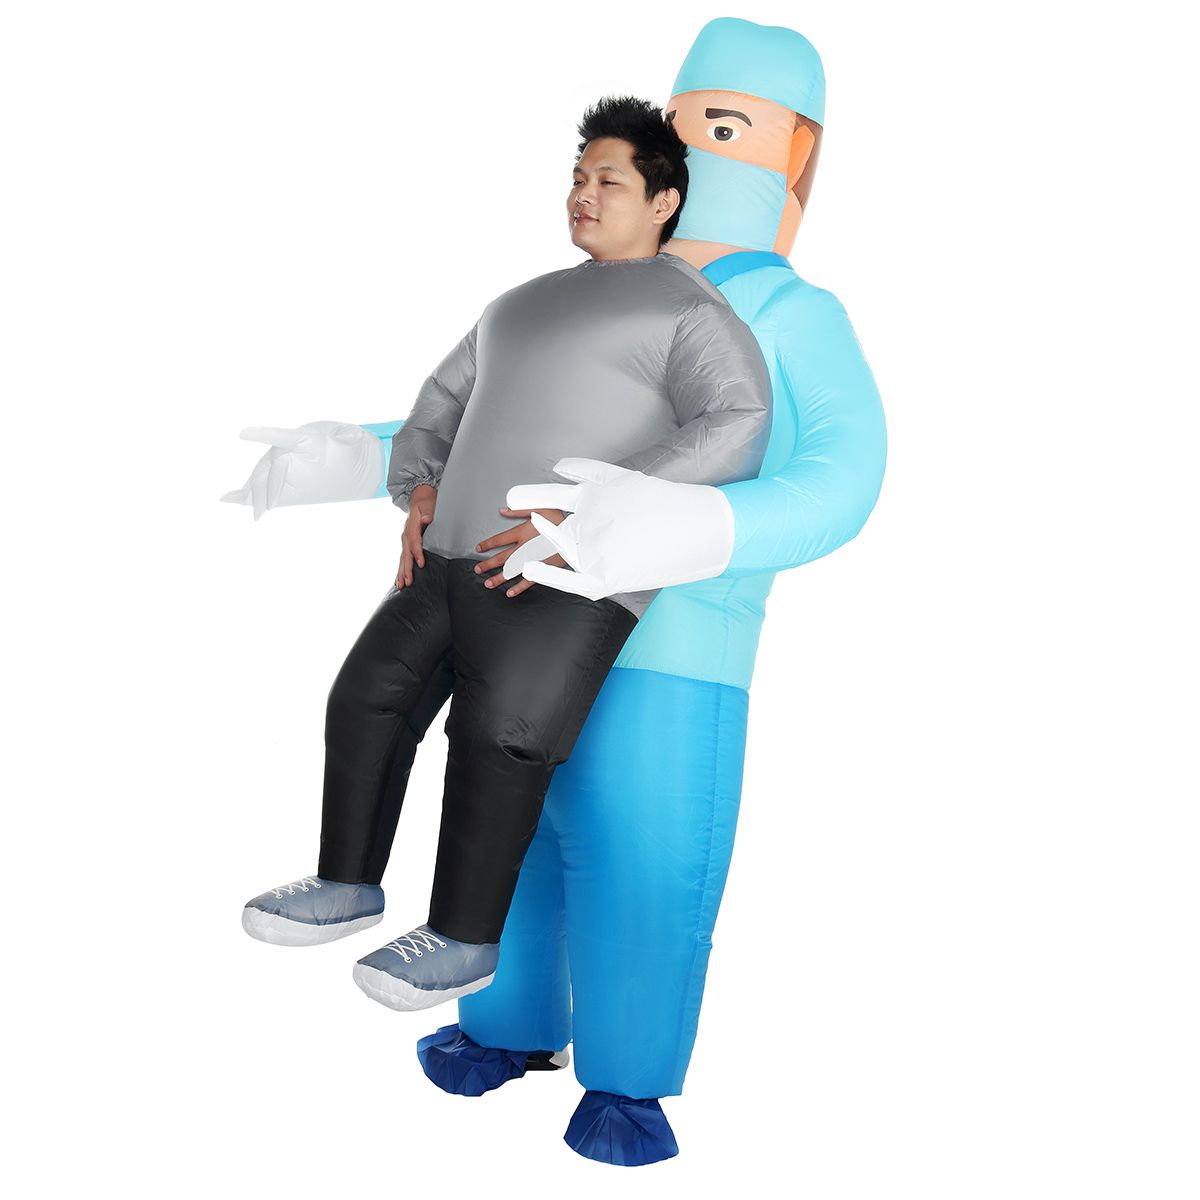 Halloween-Doctor-Holding-People-Inflatable-Clothing-Stage-Performance-Inflatable-Clothing-Devil-Funn-1756984